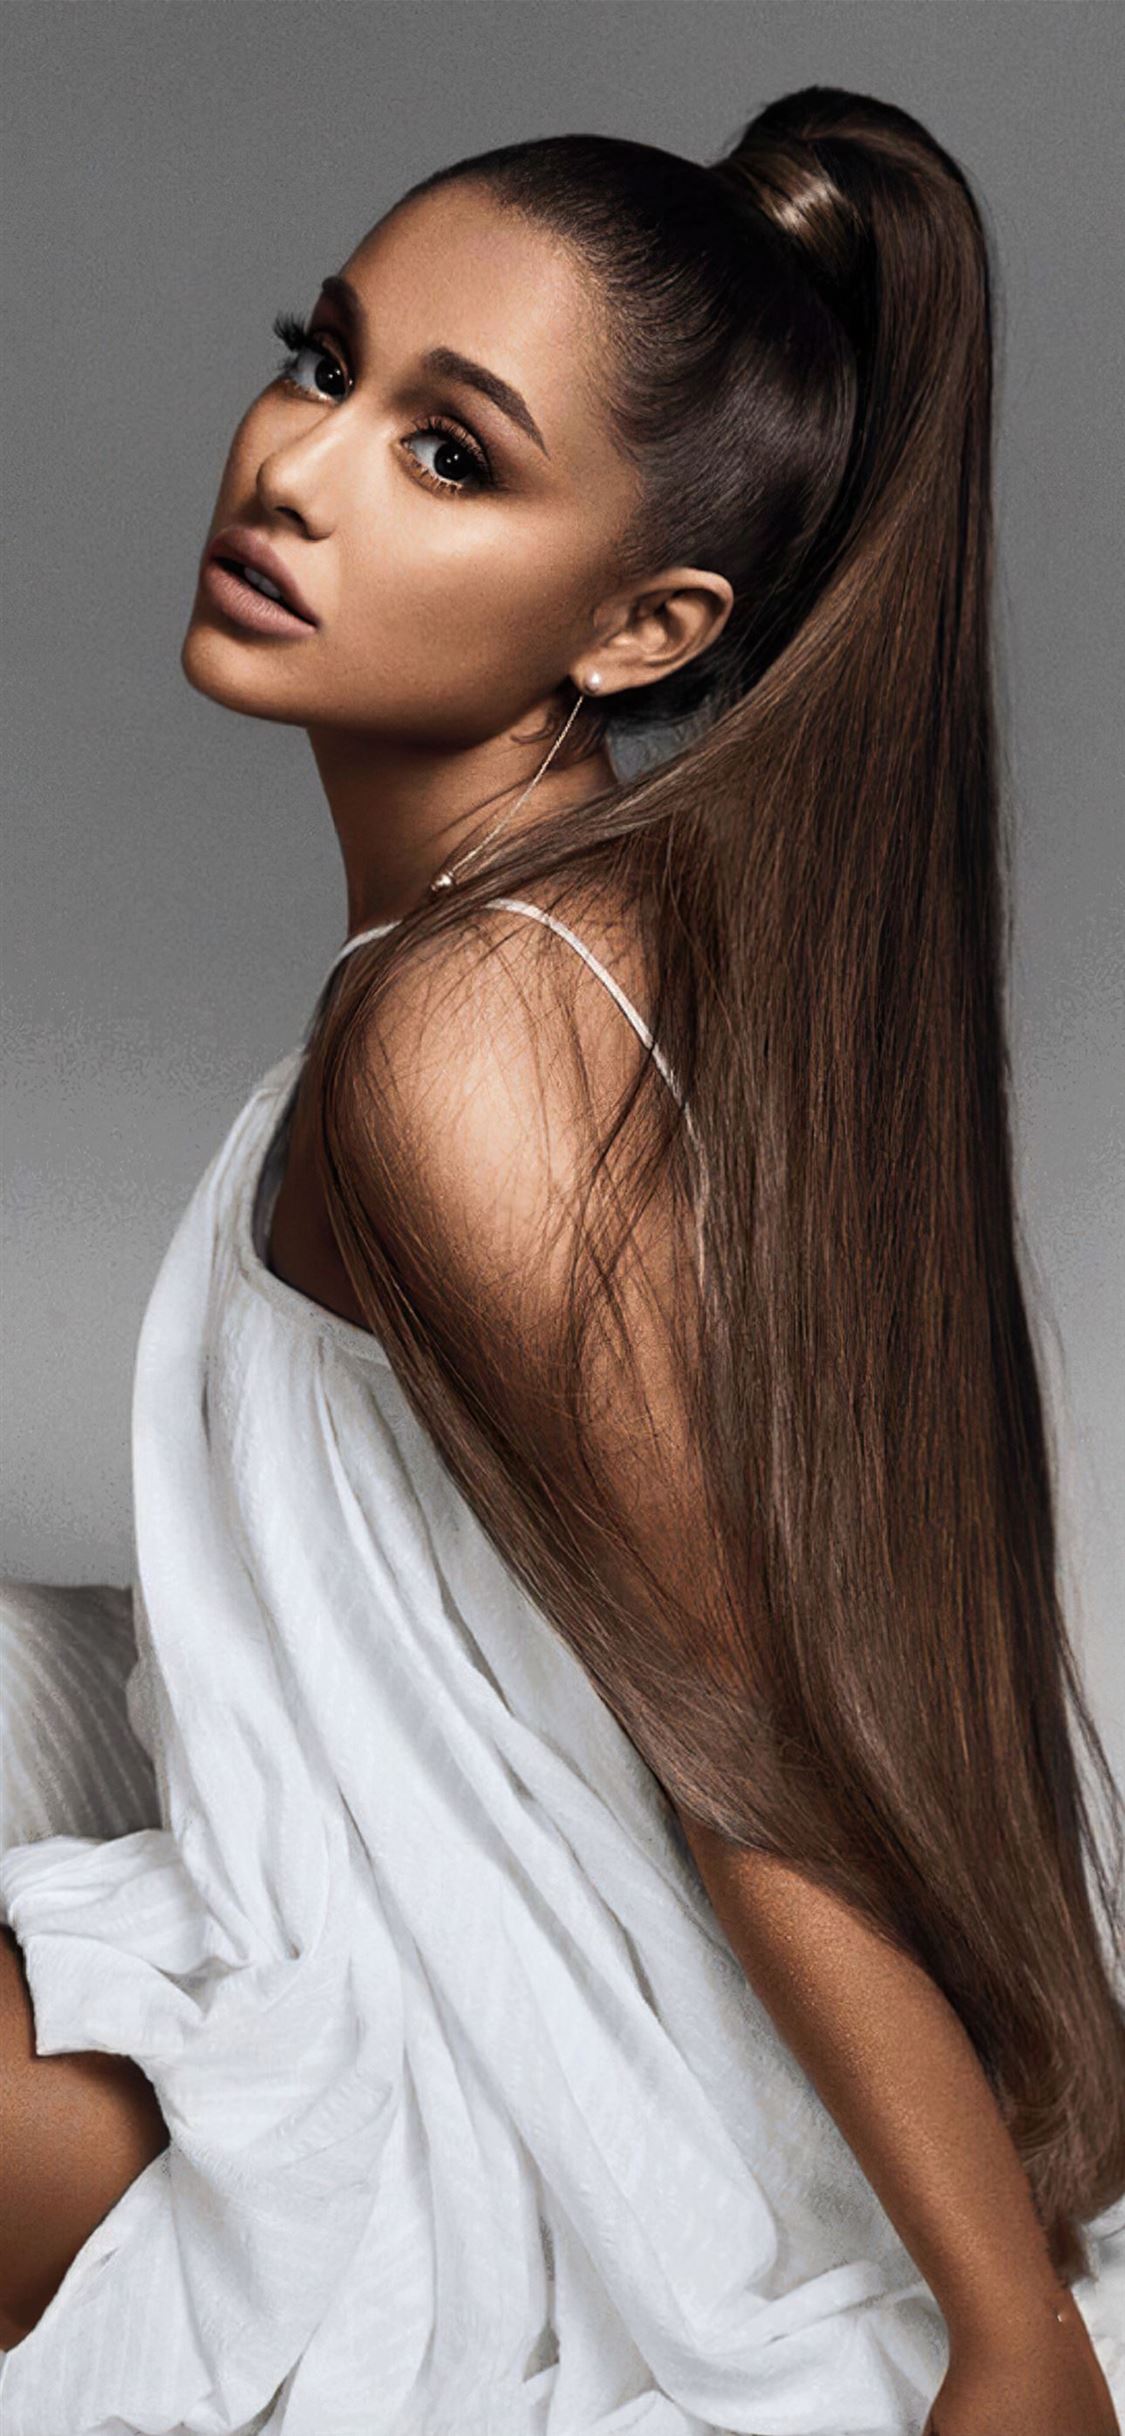 Ariana Grande Iphone X Wallpapers Free Download